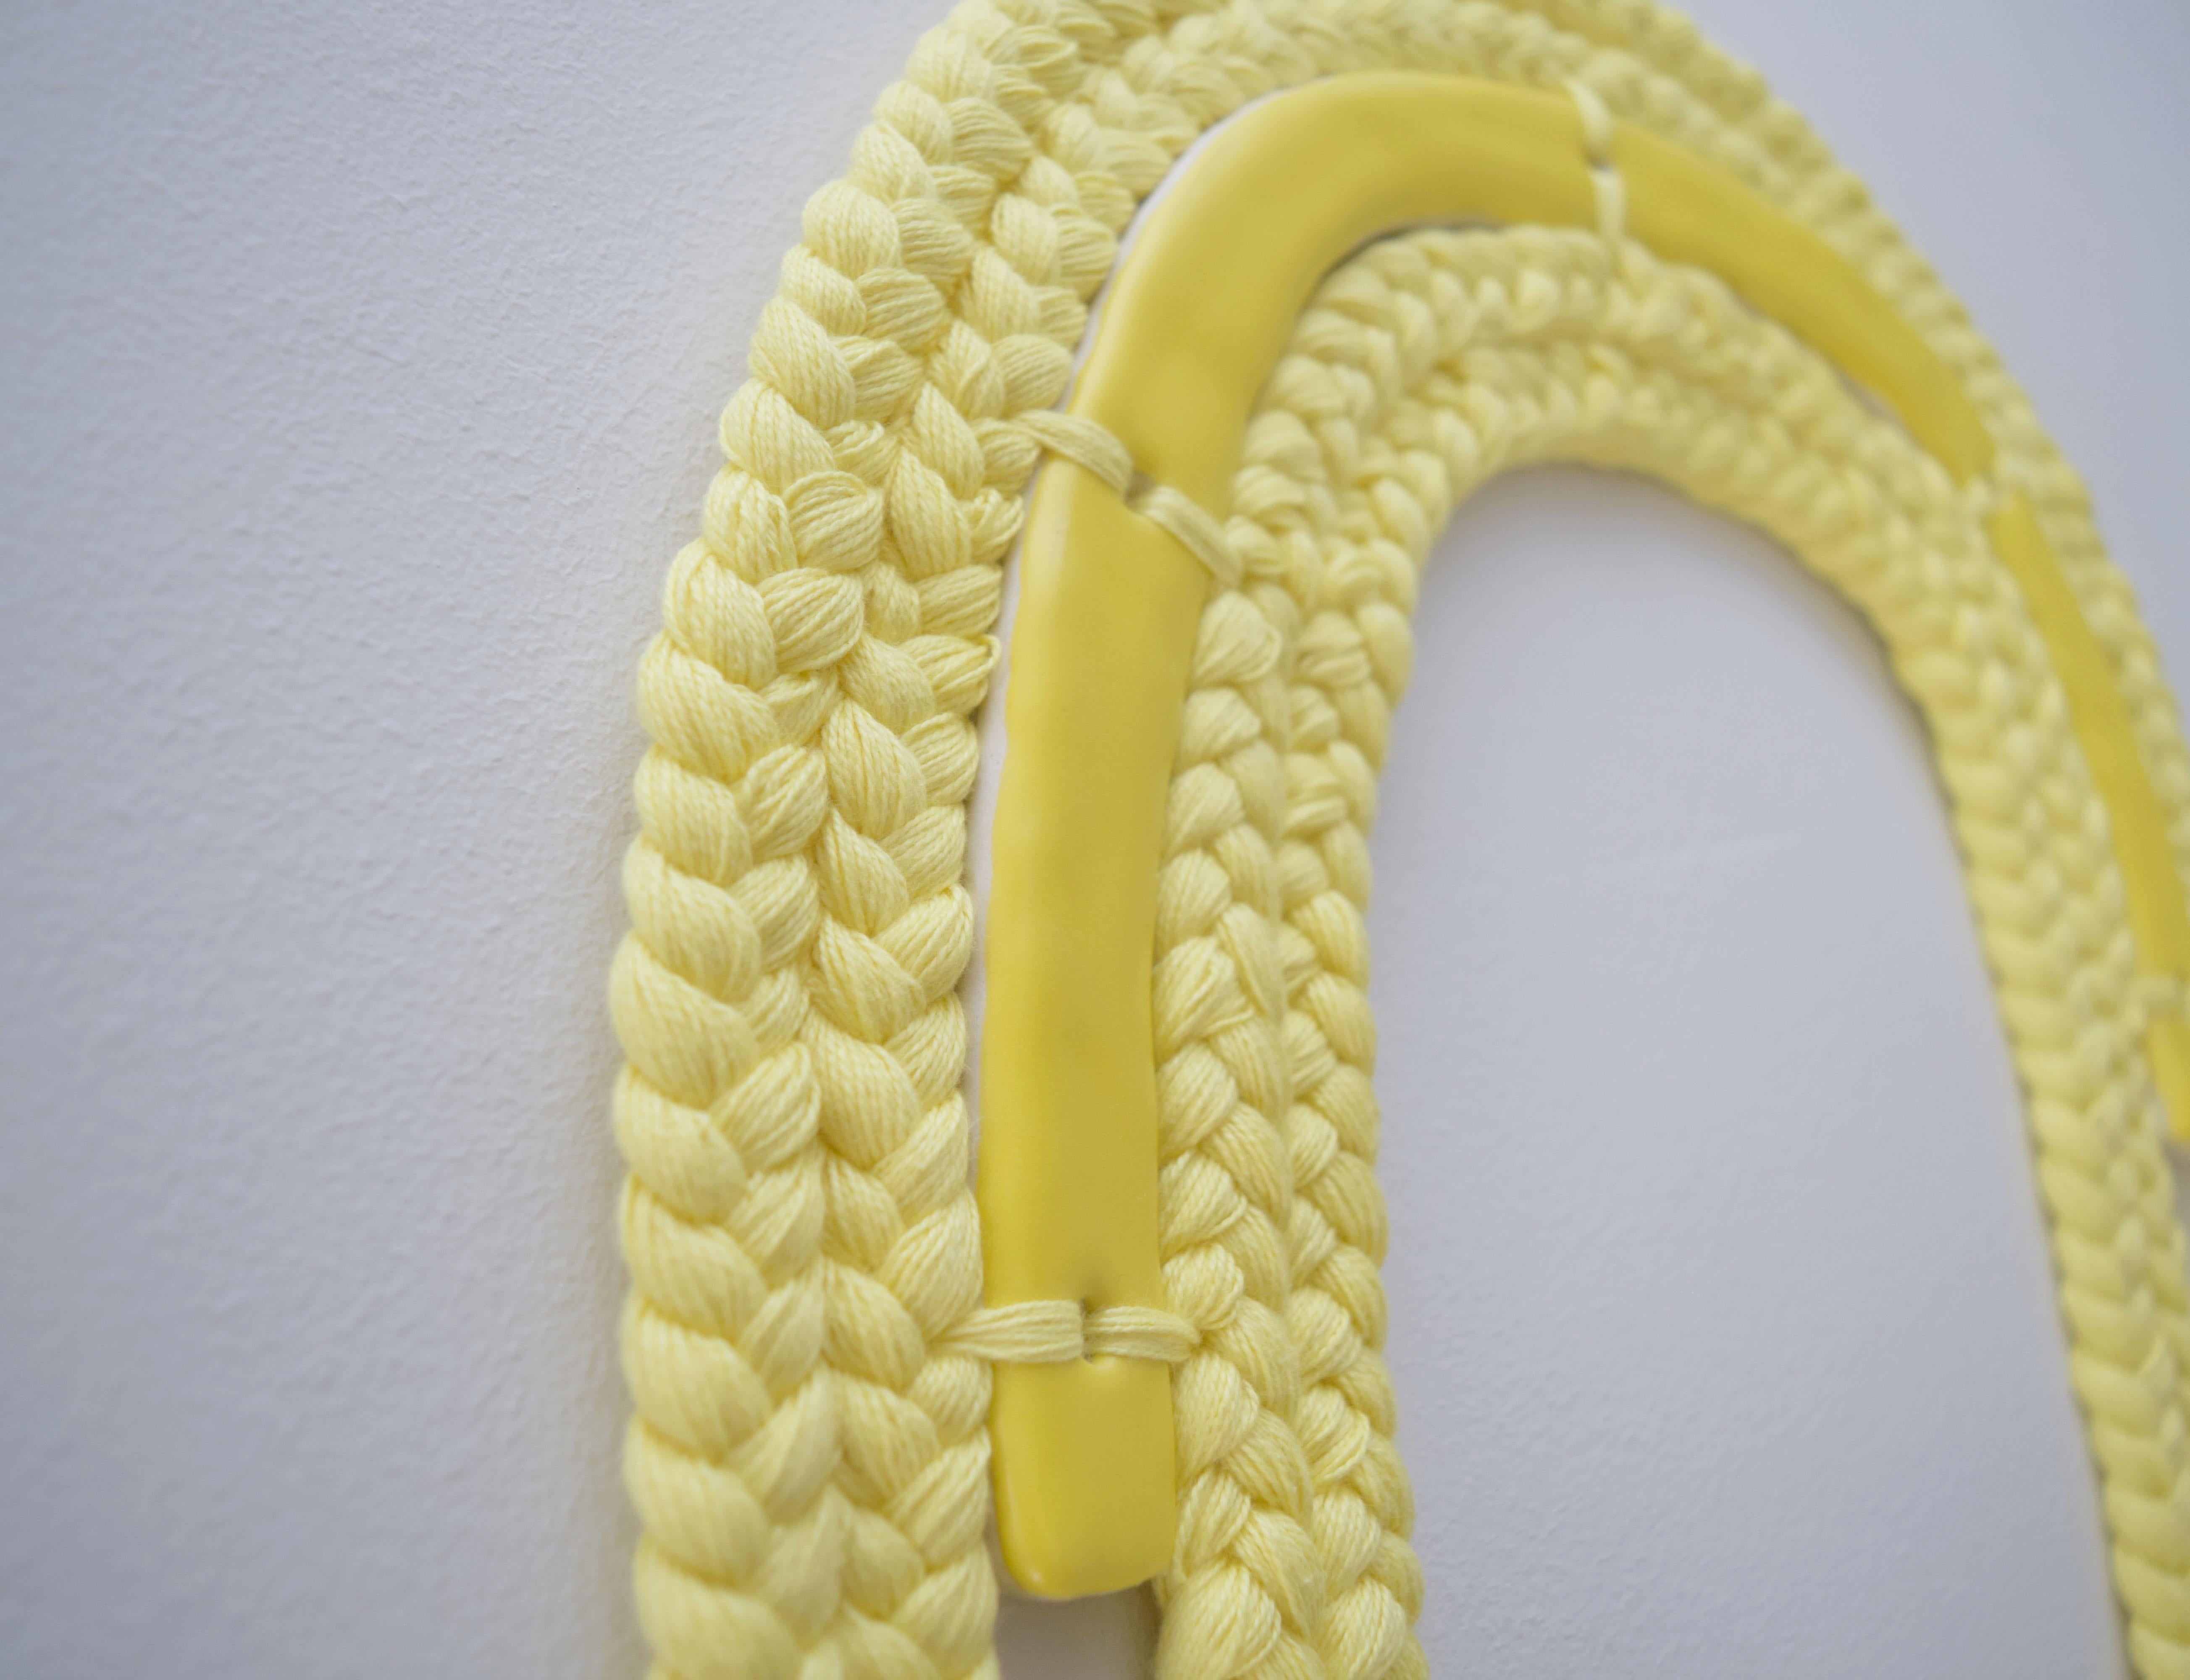 Hand-Crafted One of a Kind Ceramic and Cotton Wall Sculpture in Yellow